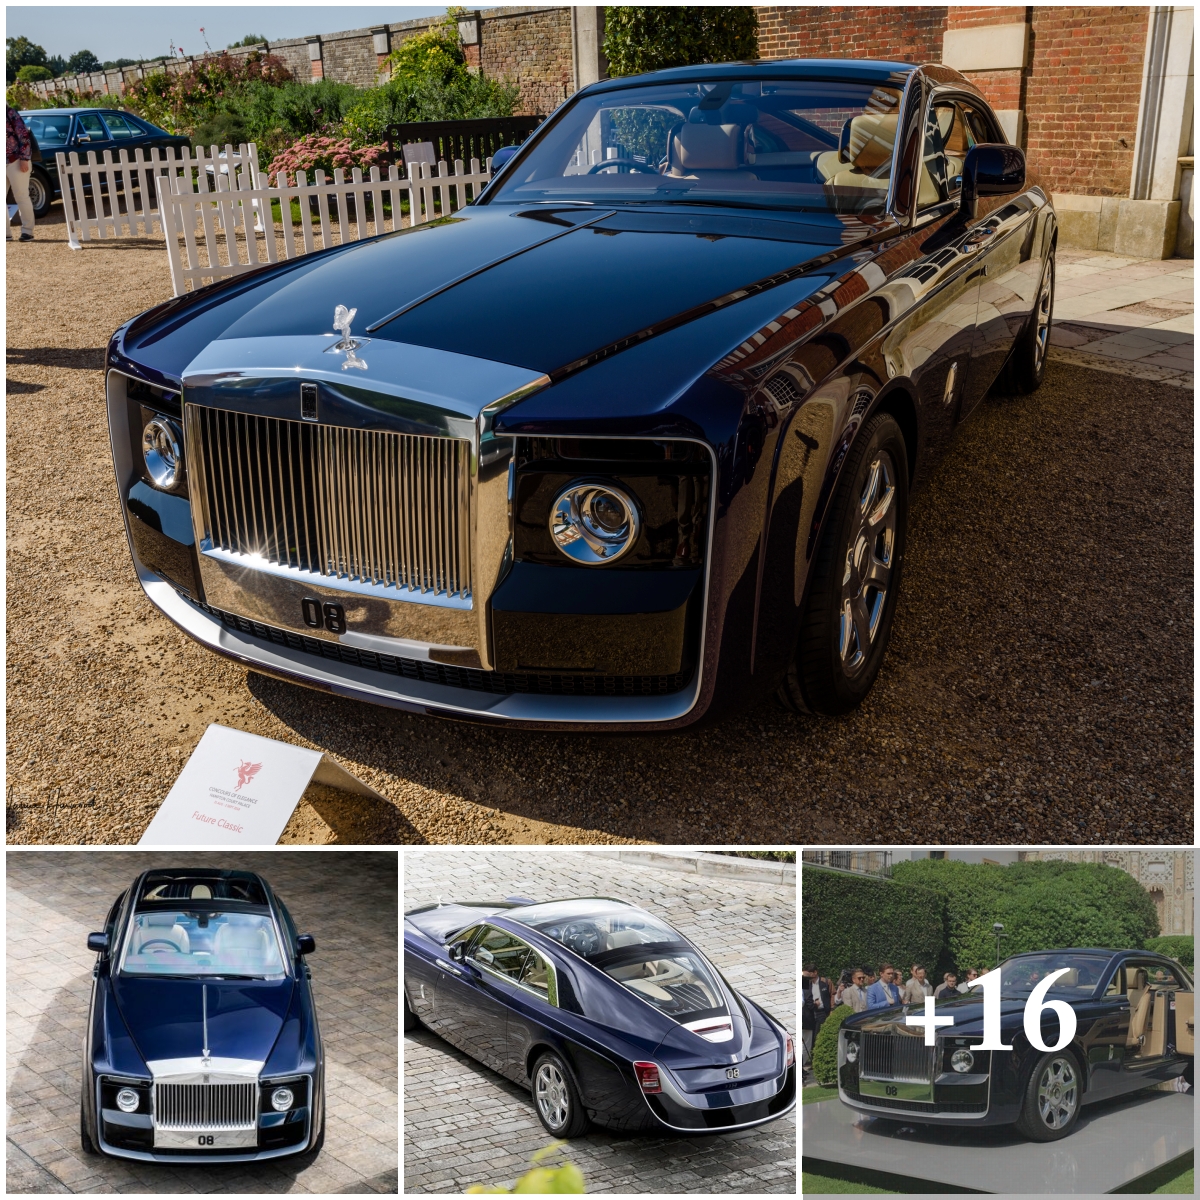 Admiring the Rolls-Royce Sweptail: The “No Dead Ends” Masterpiece Worth $13 Million